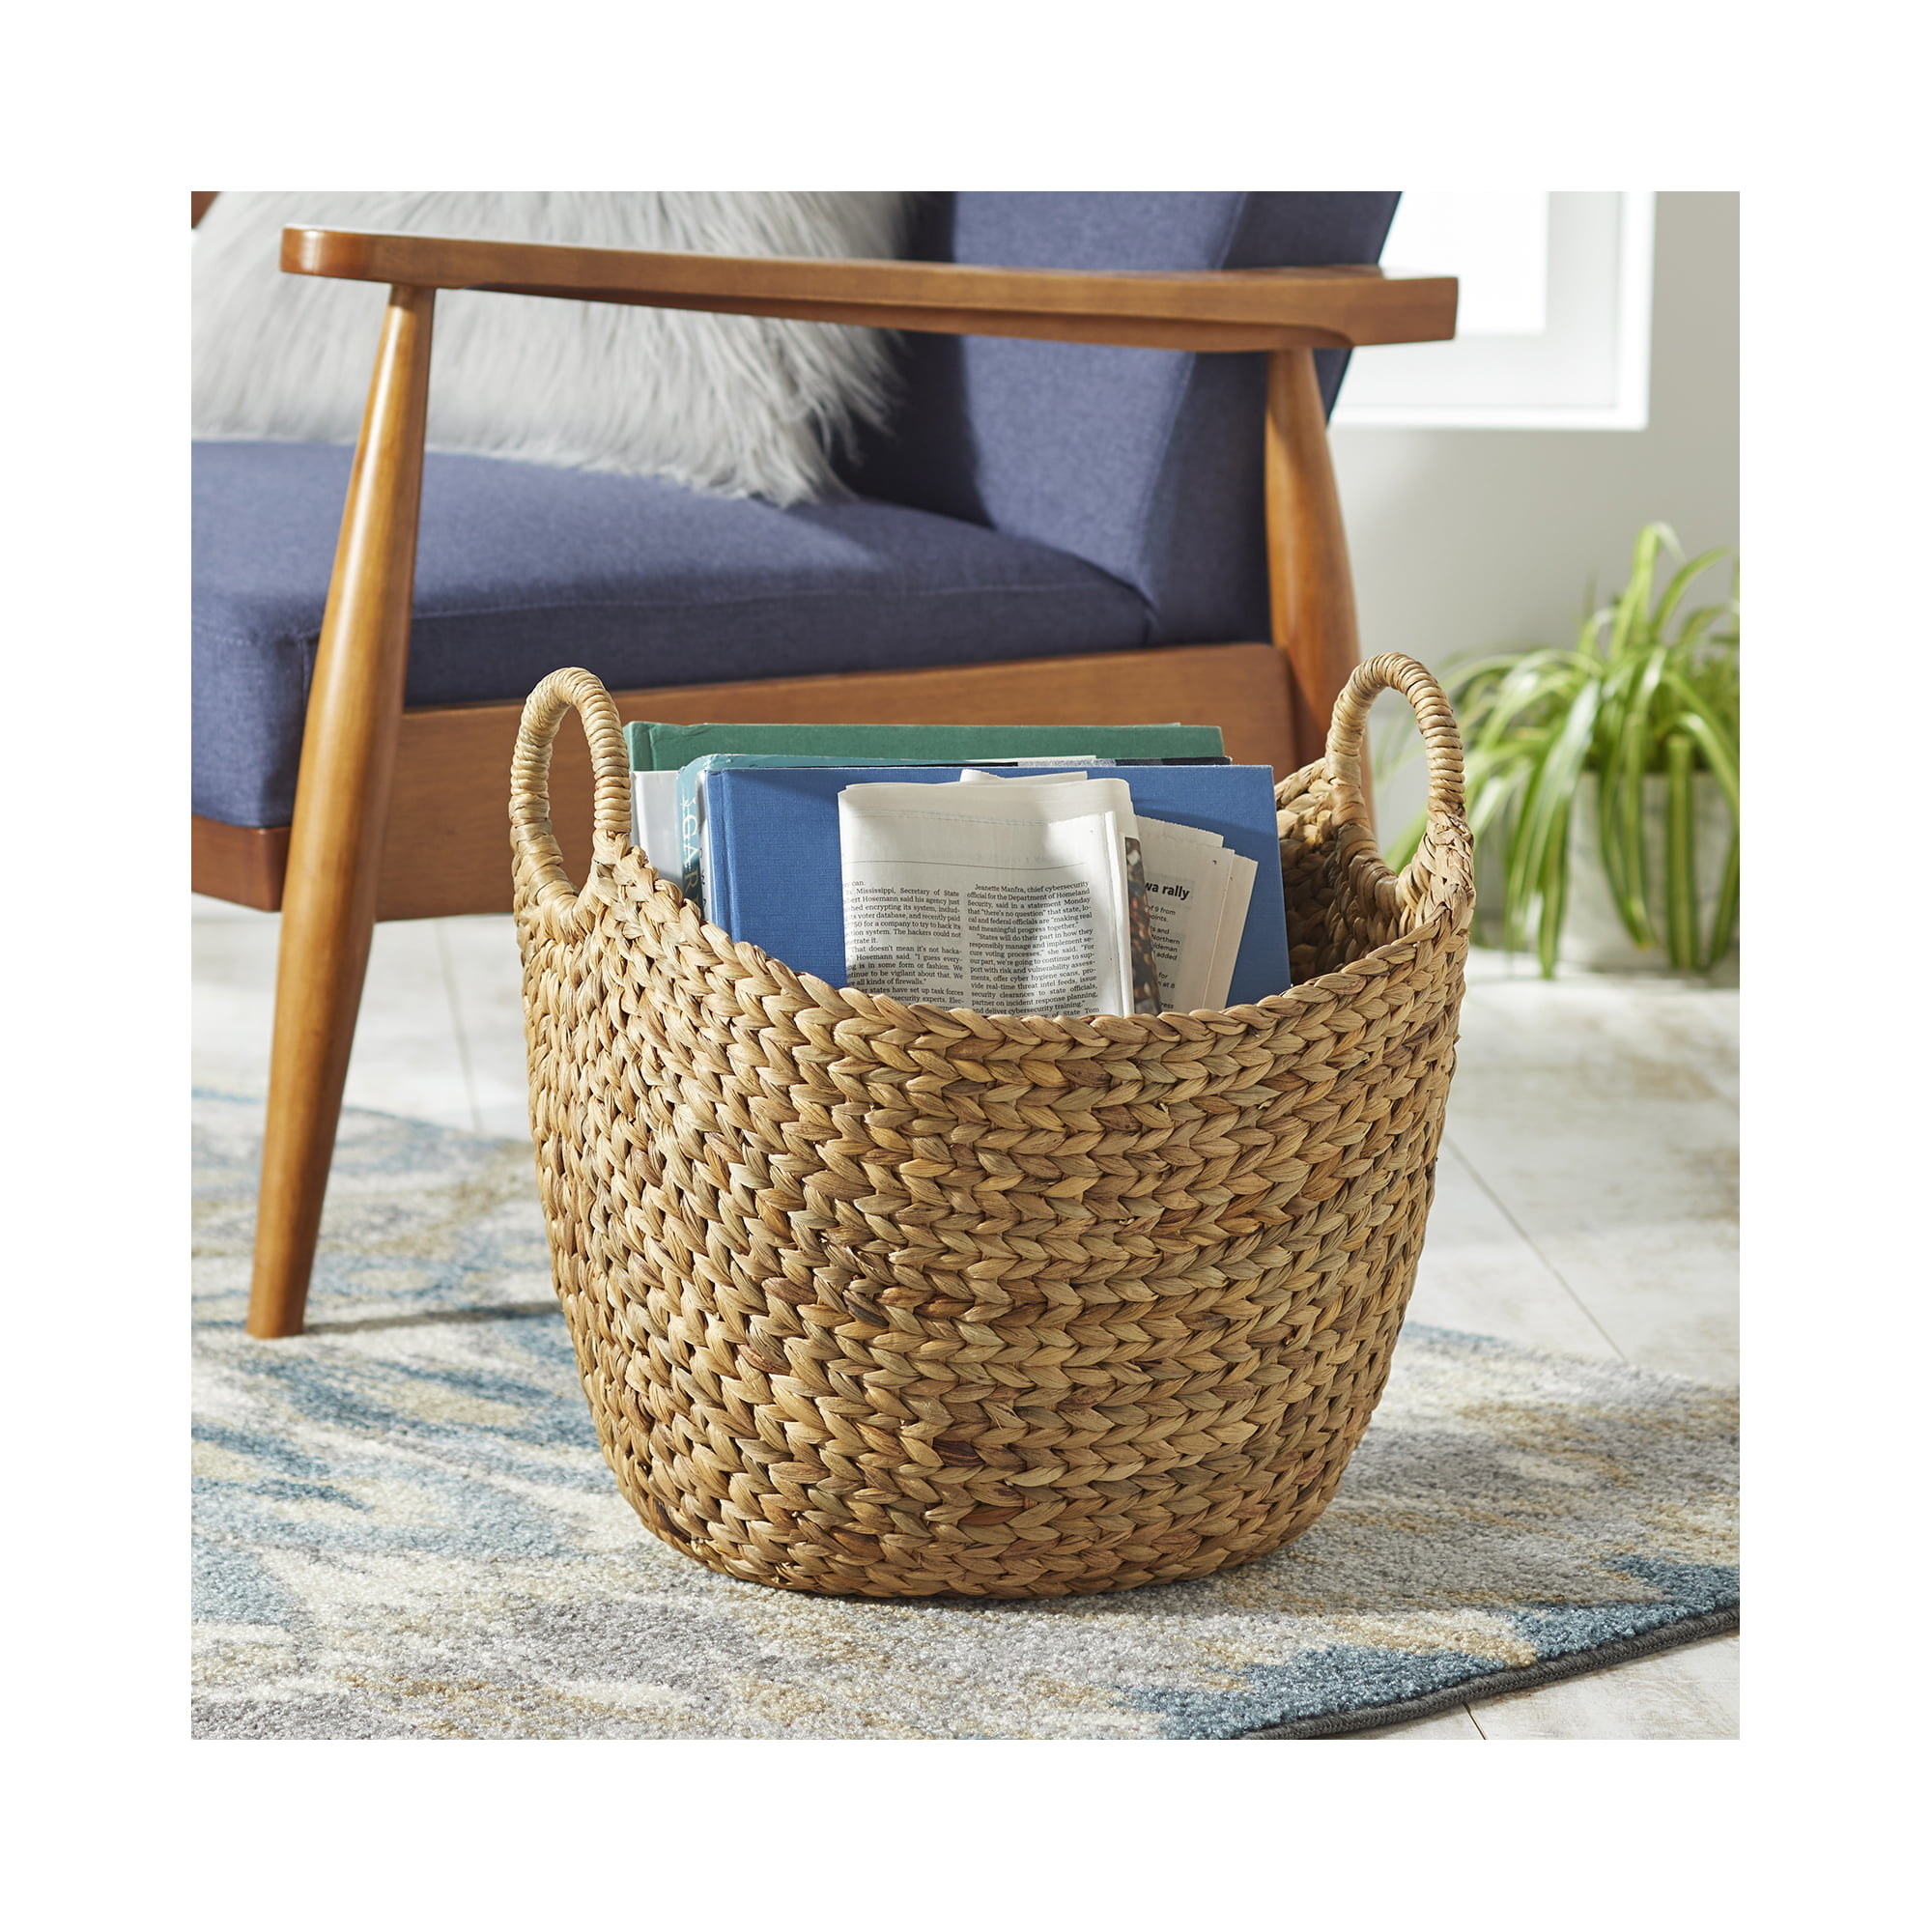 woven boat basket holding reading materials